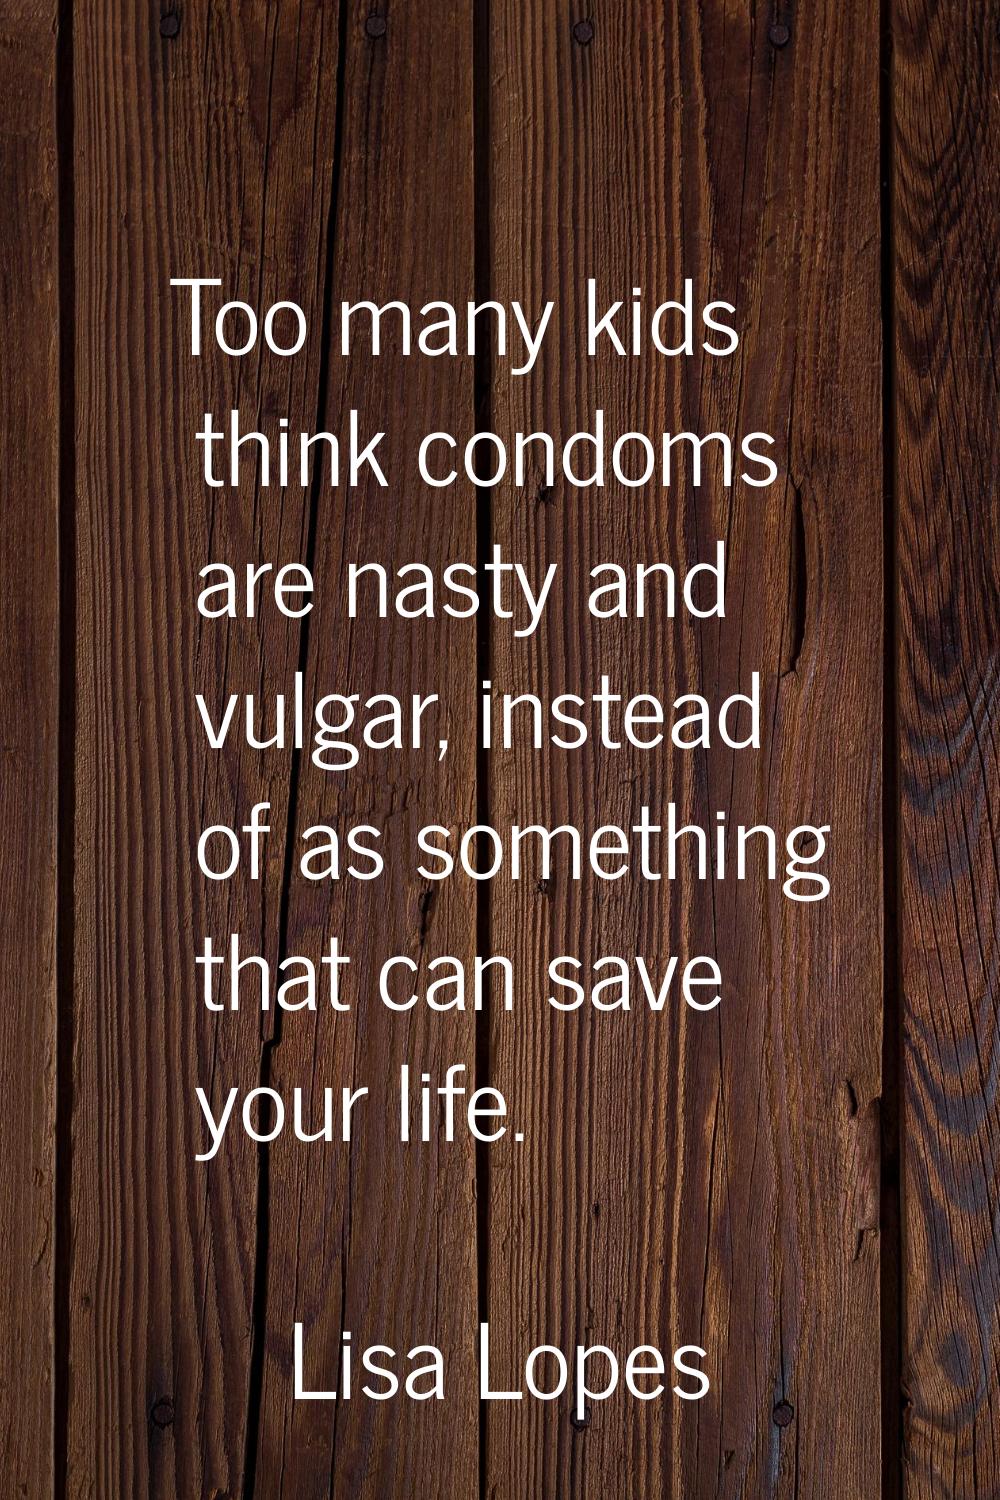 Too many kids think condoms are nasty and vulgar, instead of as something that can save your life.